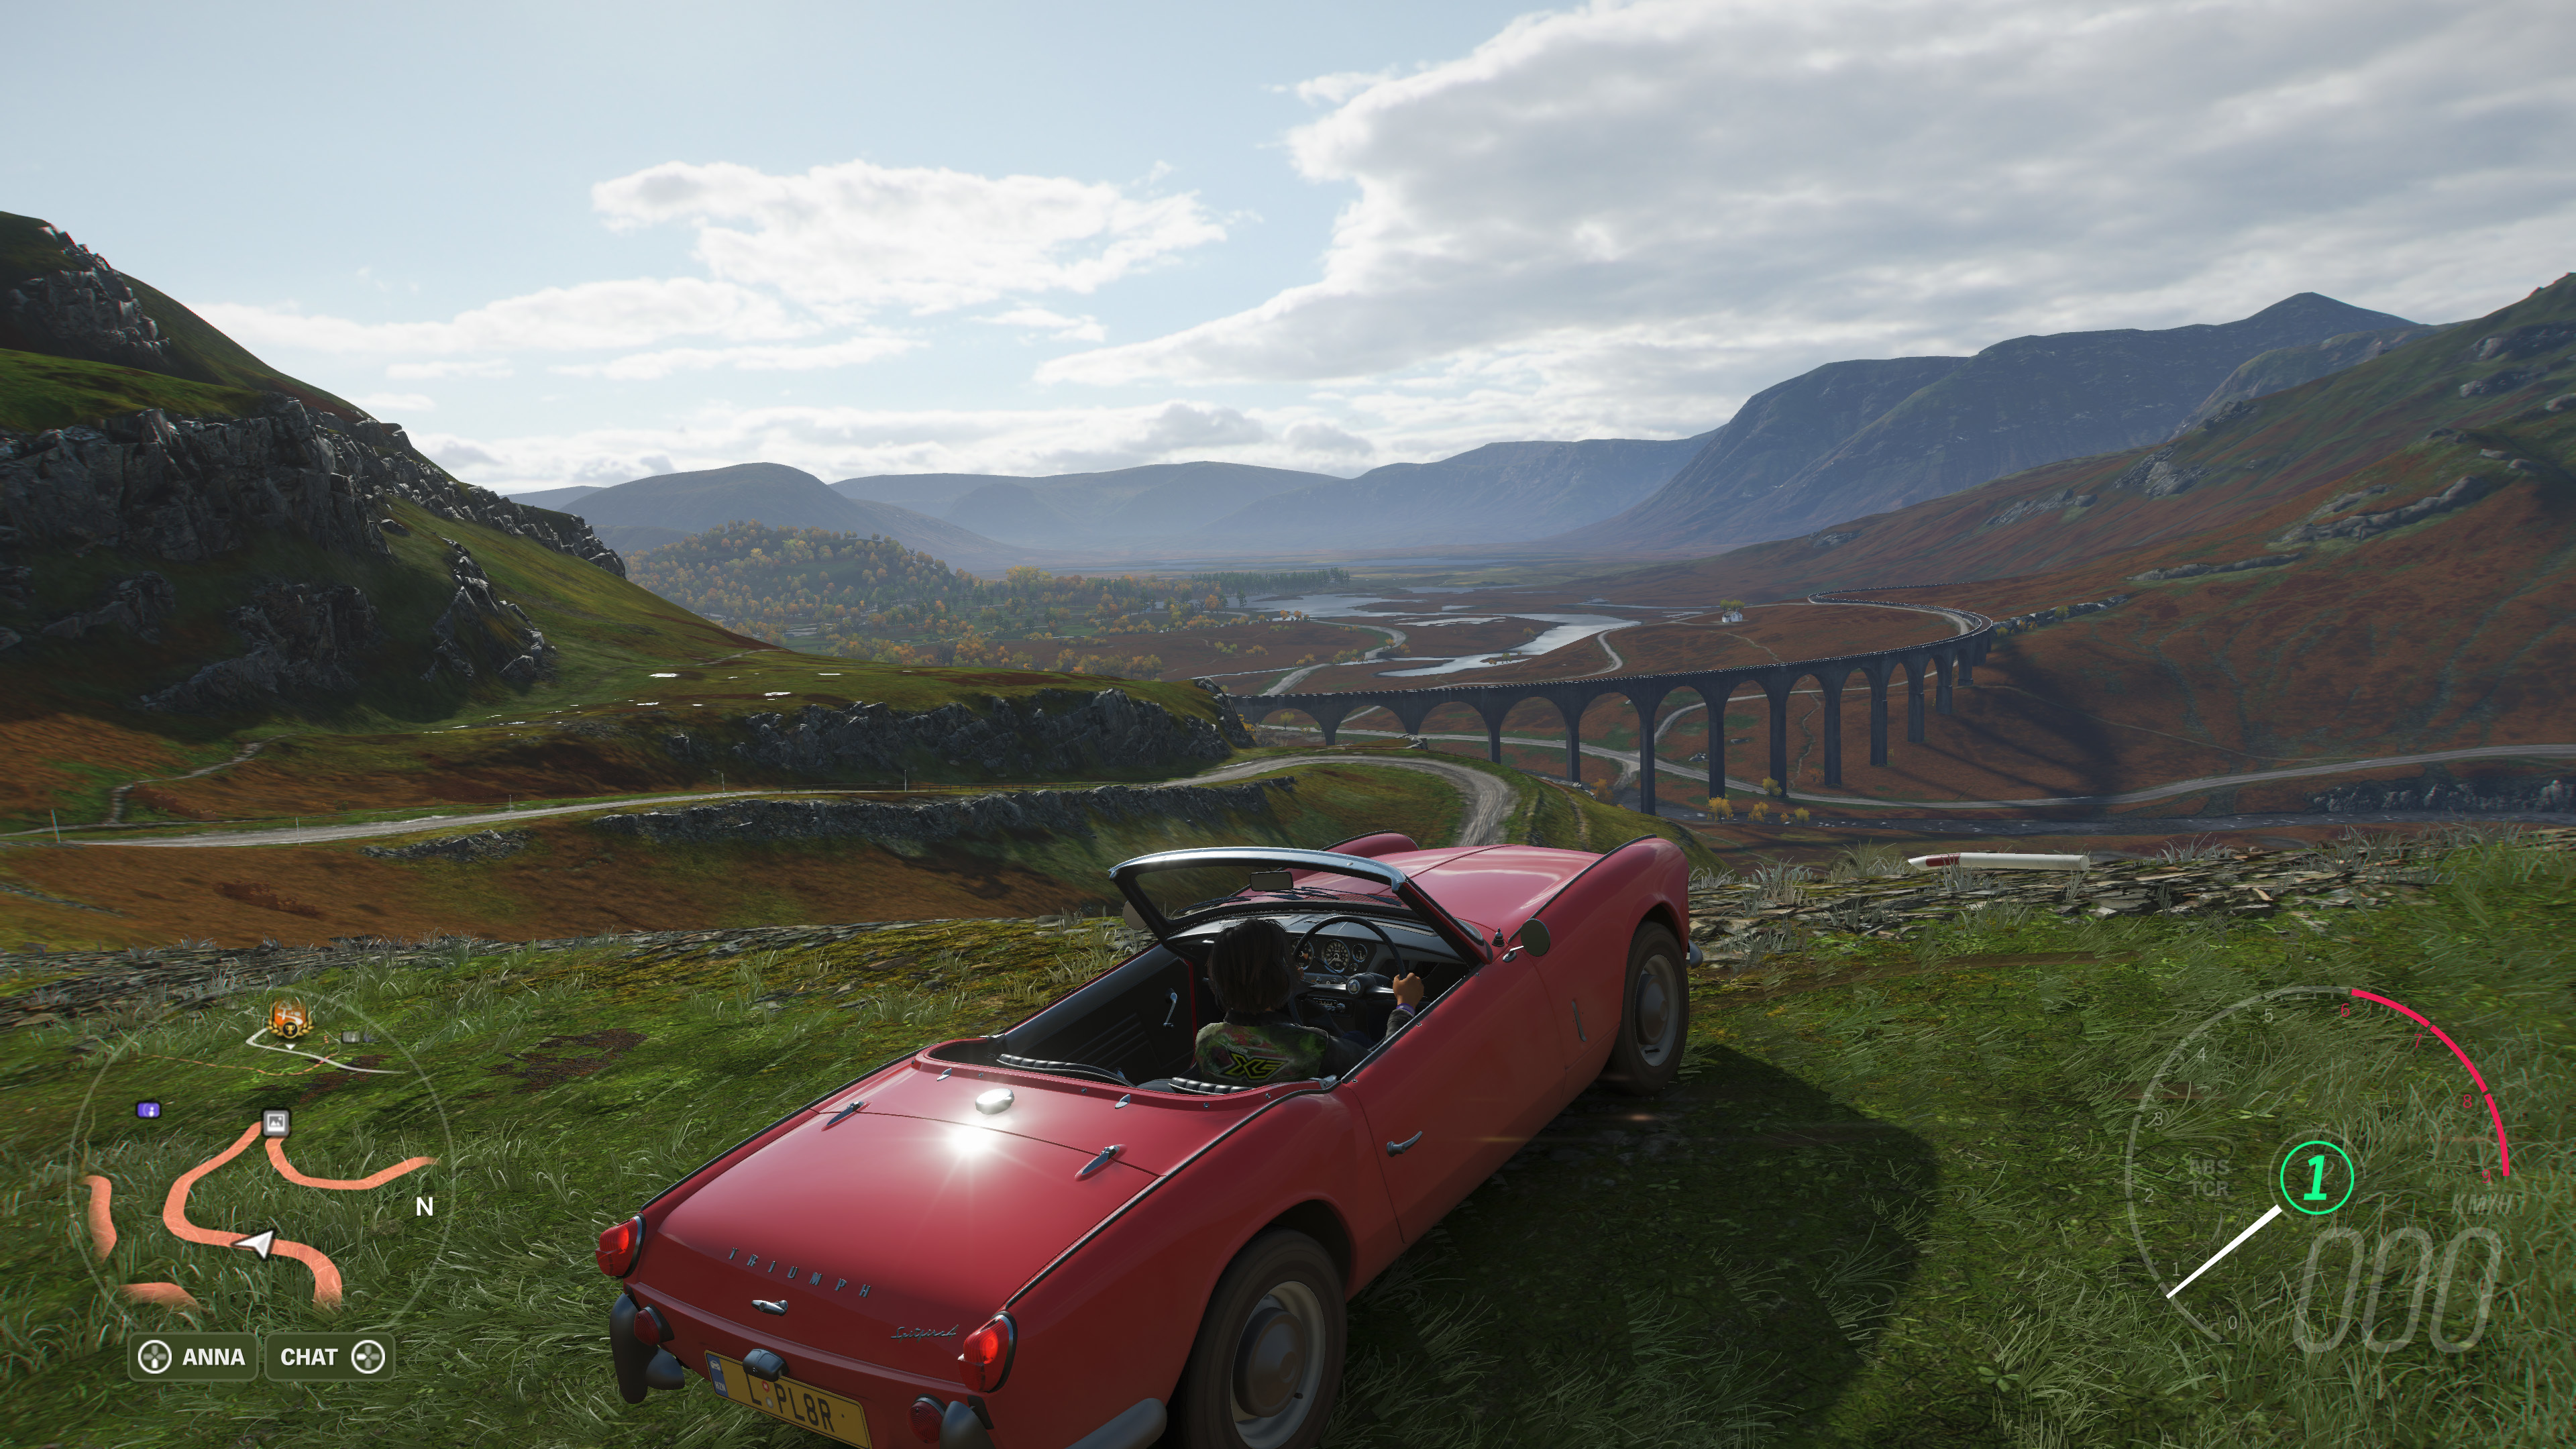 Forza Horizon 4 review: the best of Britain